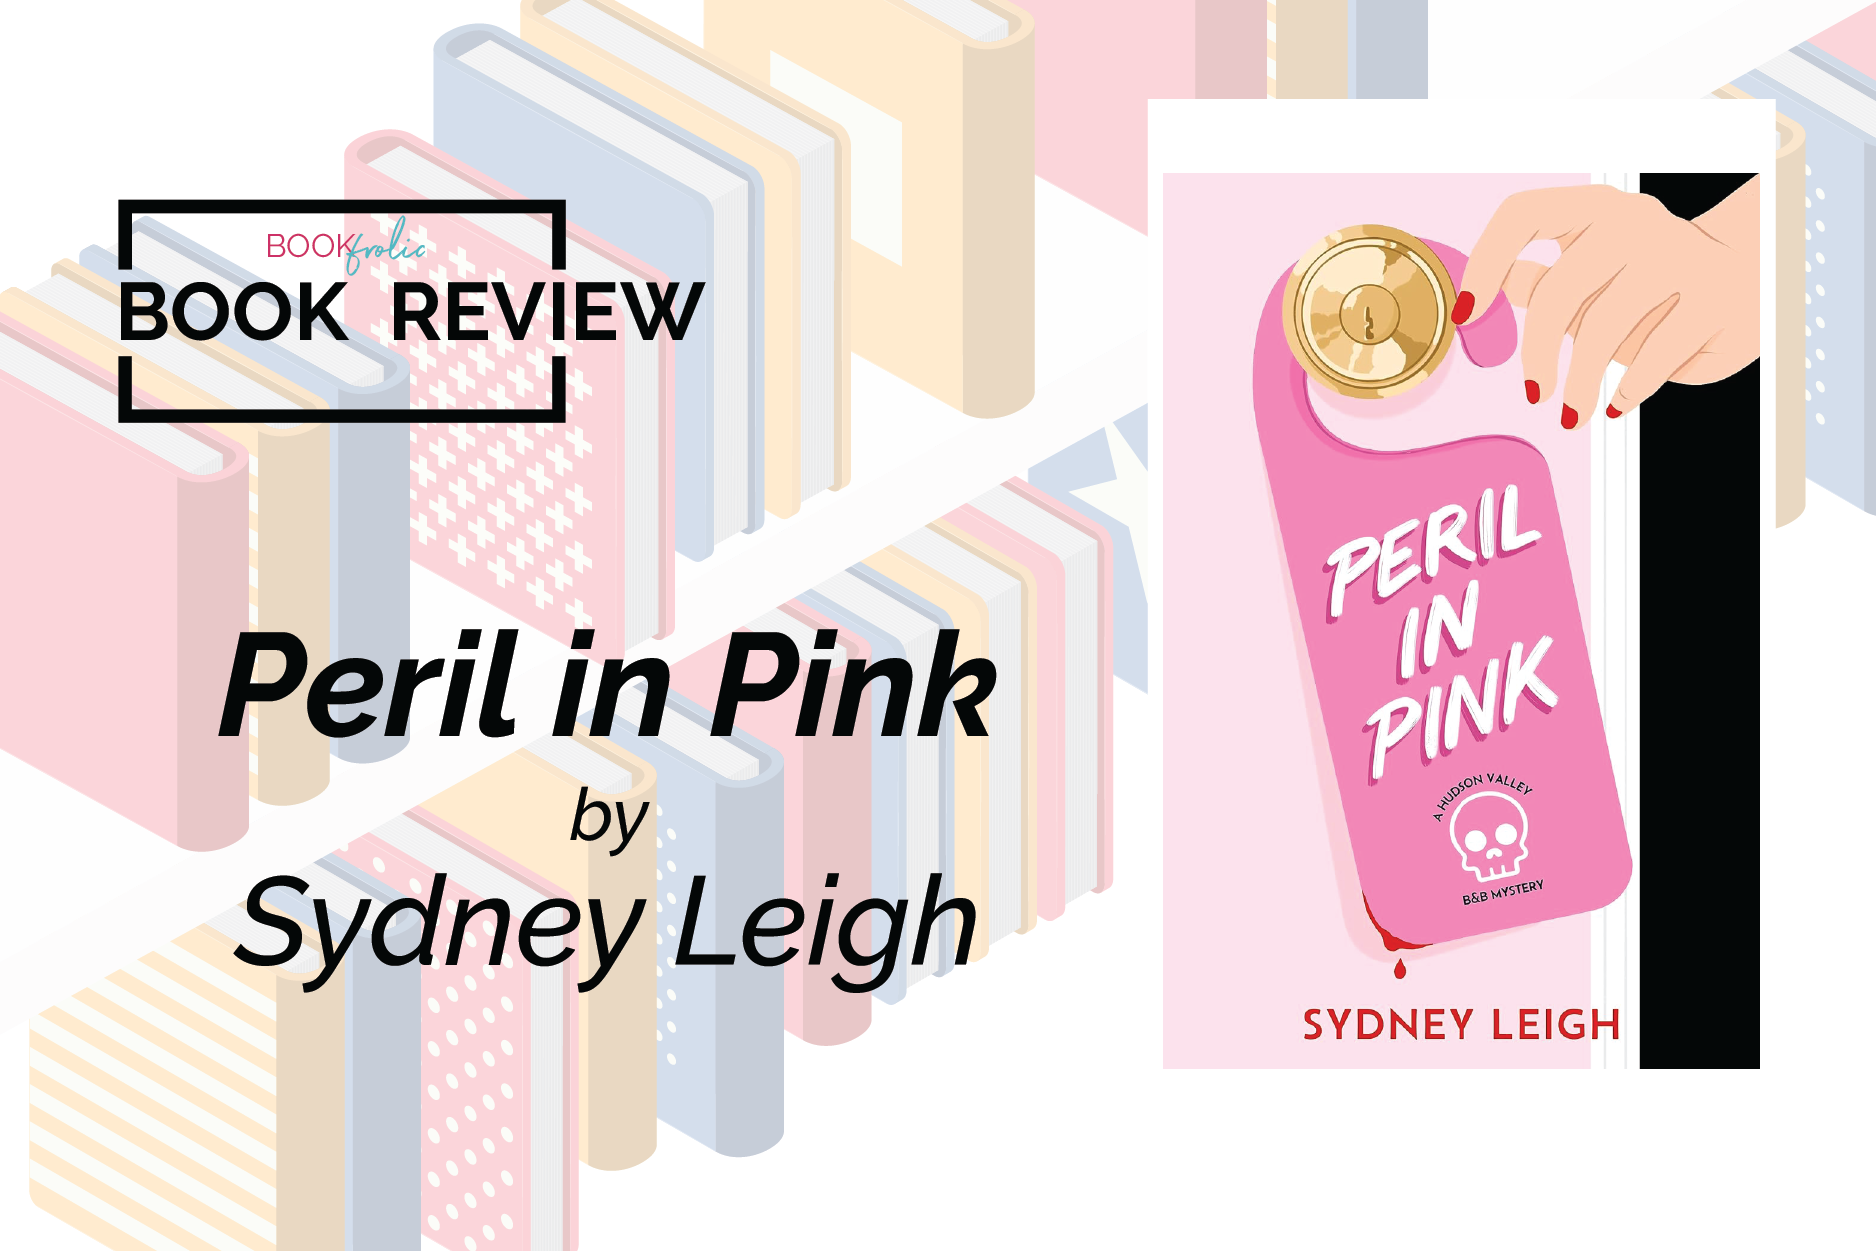 banner for book review of Peril in Pink by Sydney Leigh